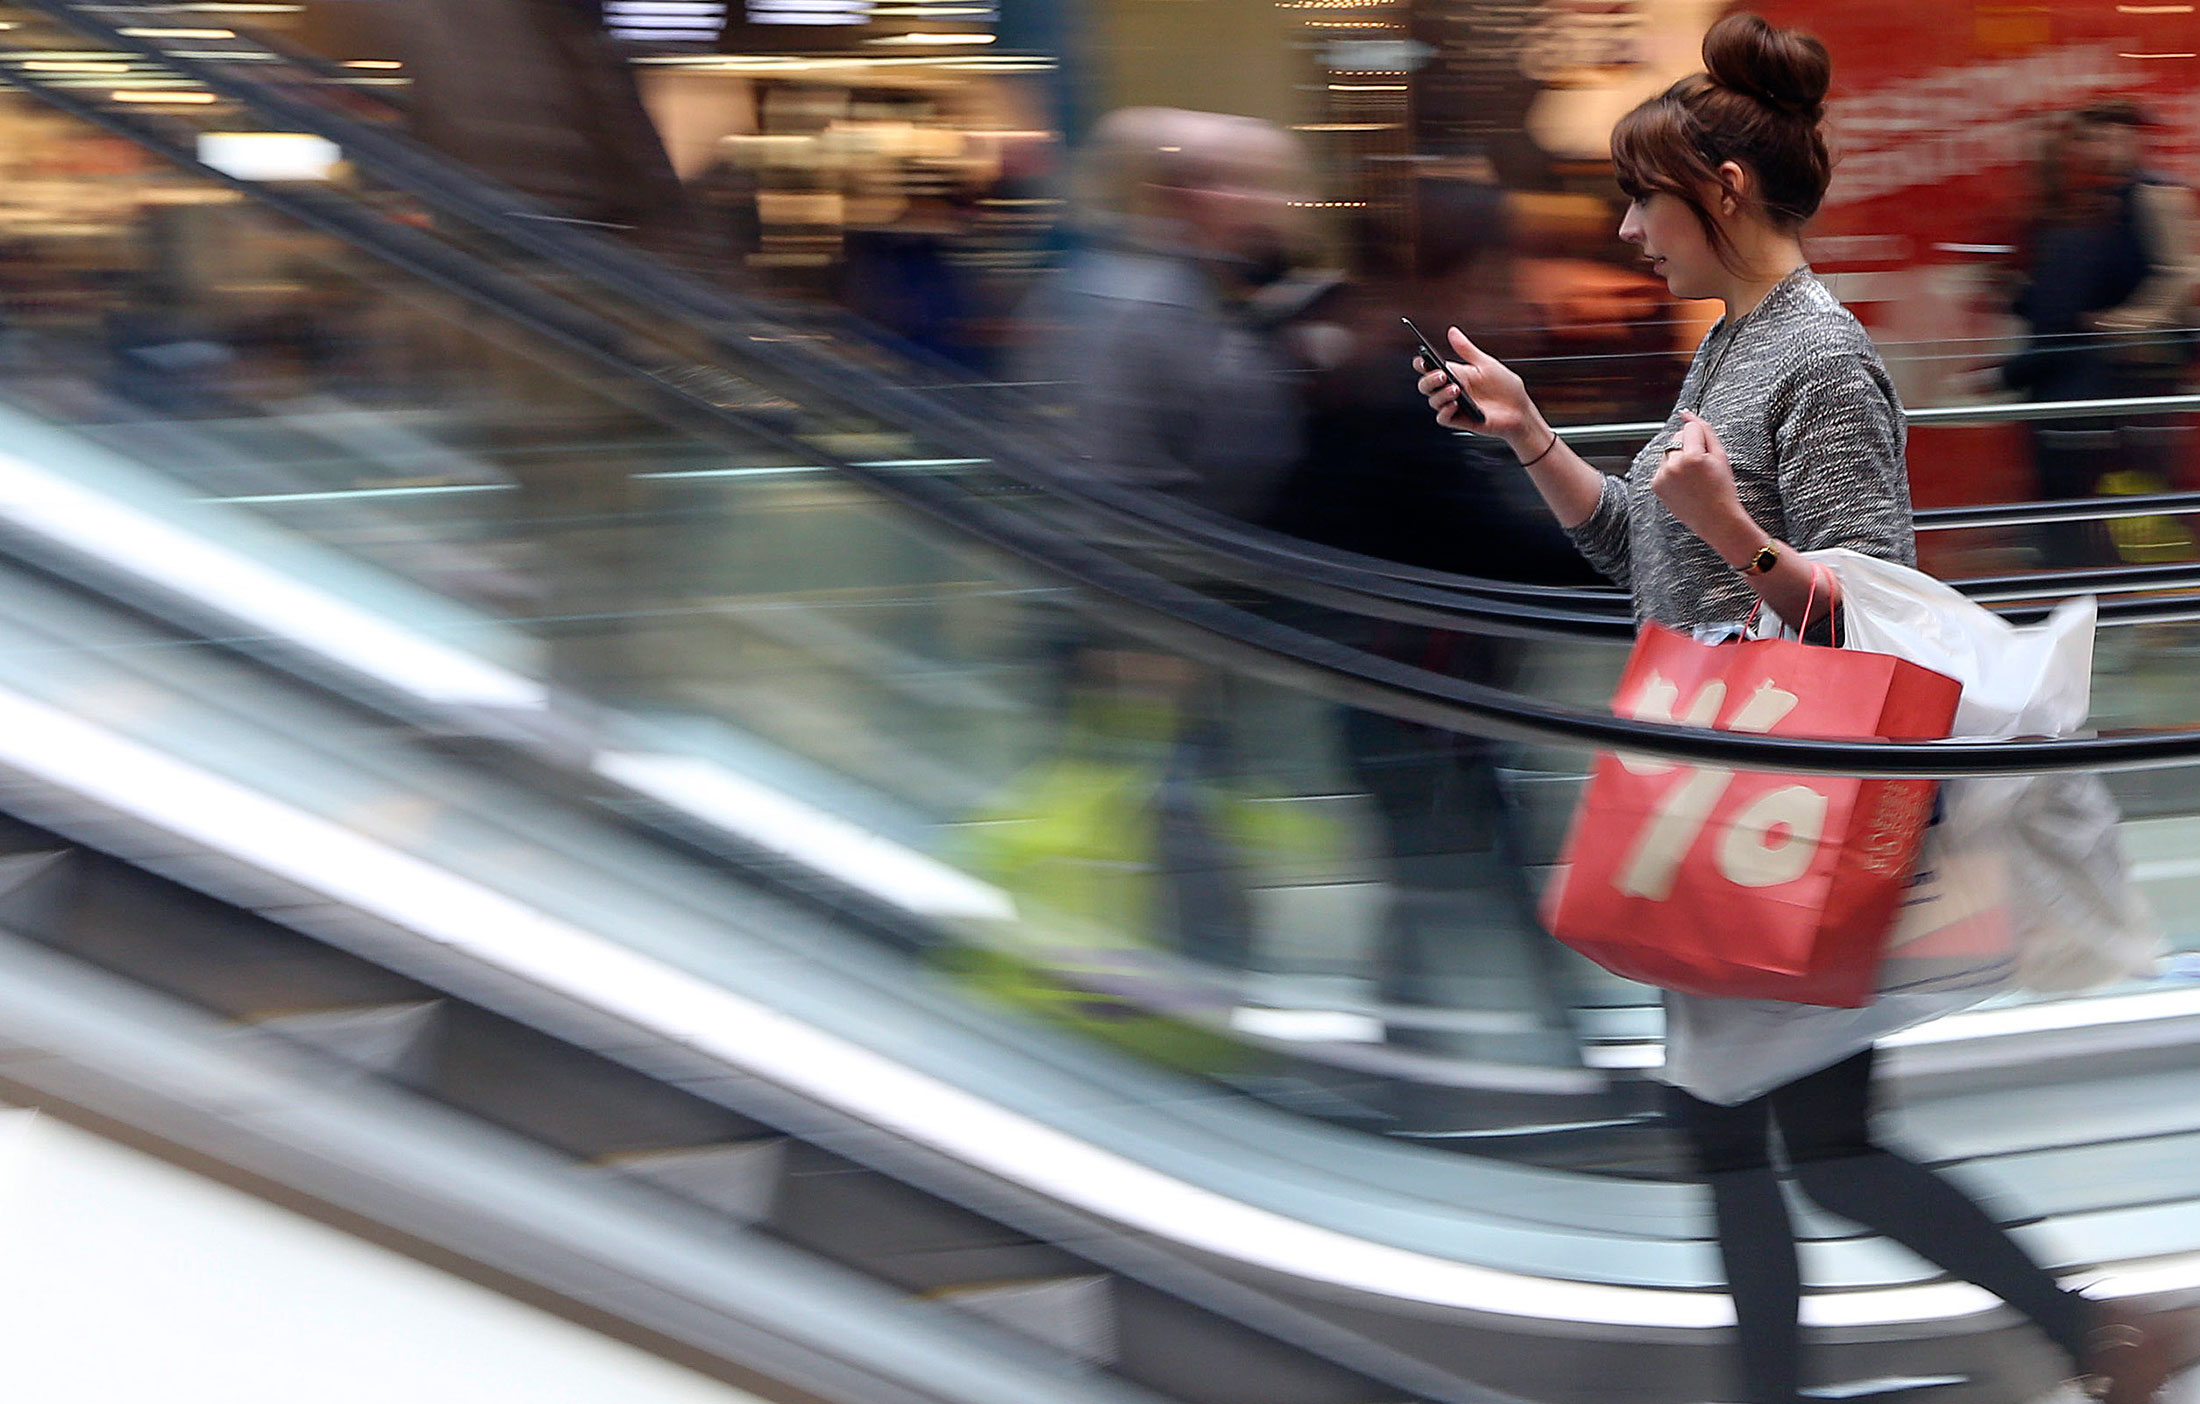 A shopper checks her mobile phone as she stands on an escalator at the Westfield Stratford City shopping mall in London, U.K., on Thursday, Dec. 27, 2012.
